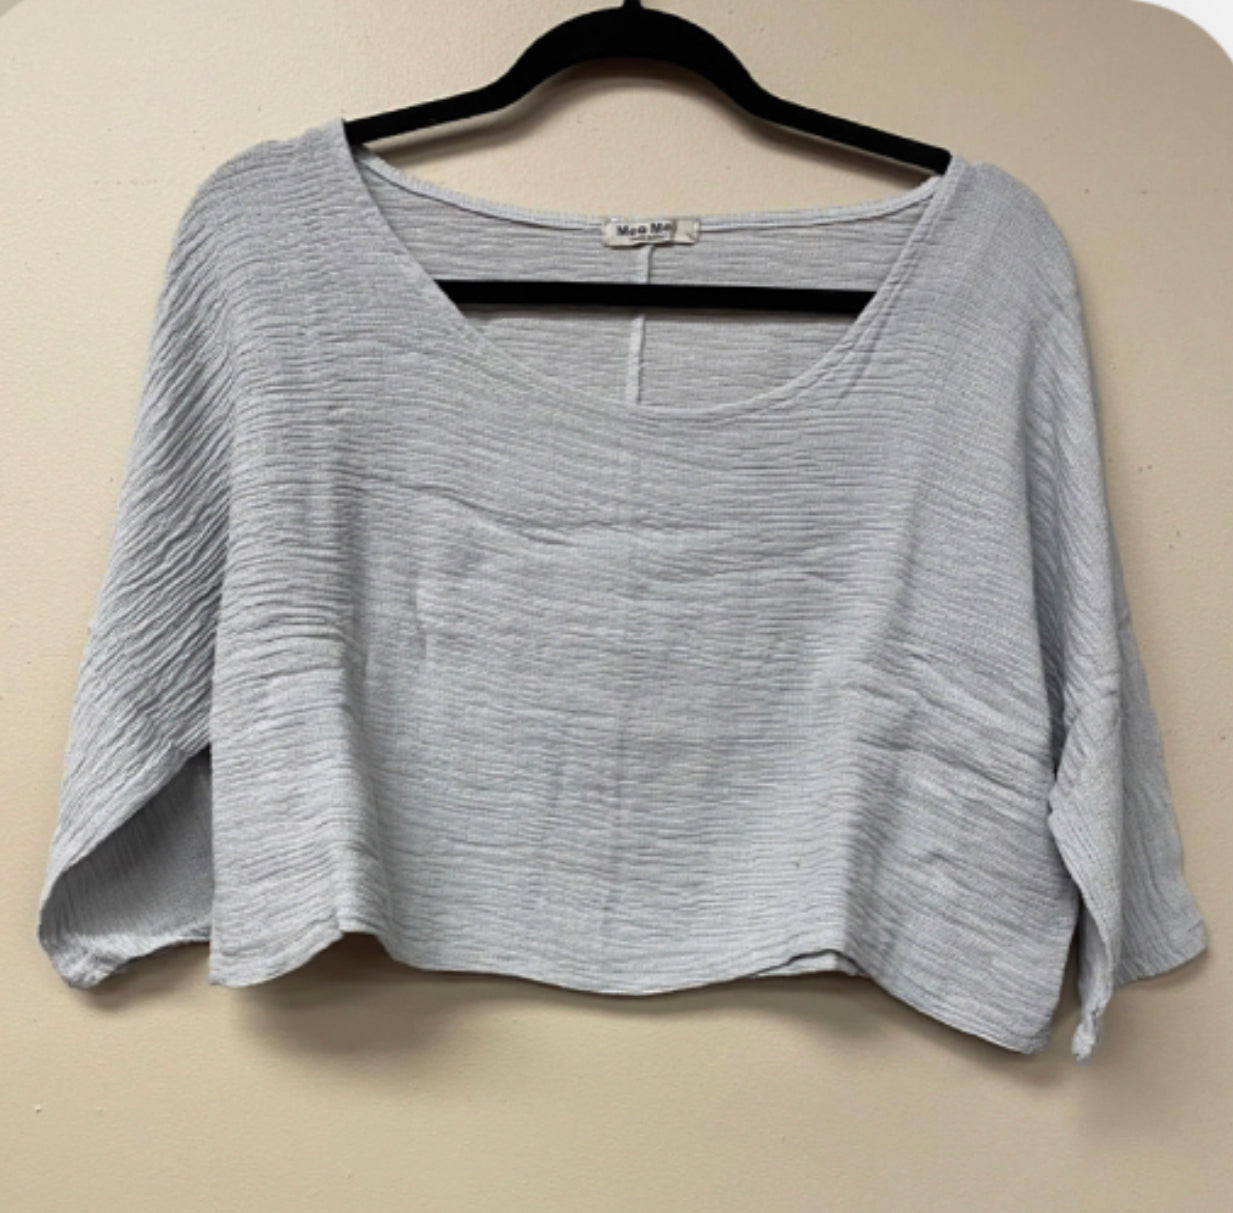 Sleeved Italian Cropped top